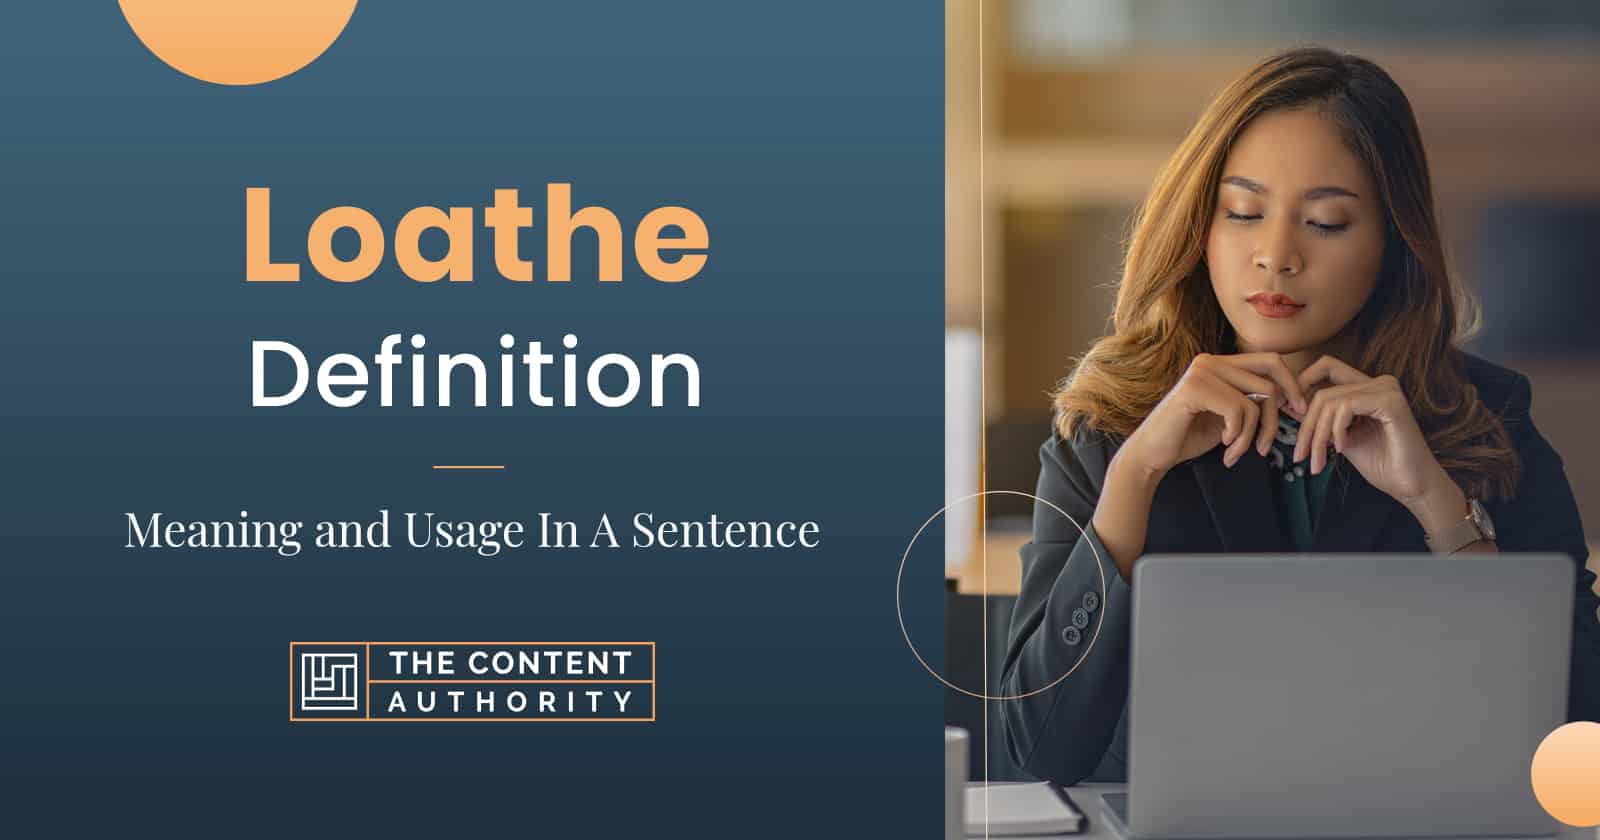 Loathe Definition – Meaning and Usage in a Sentence